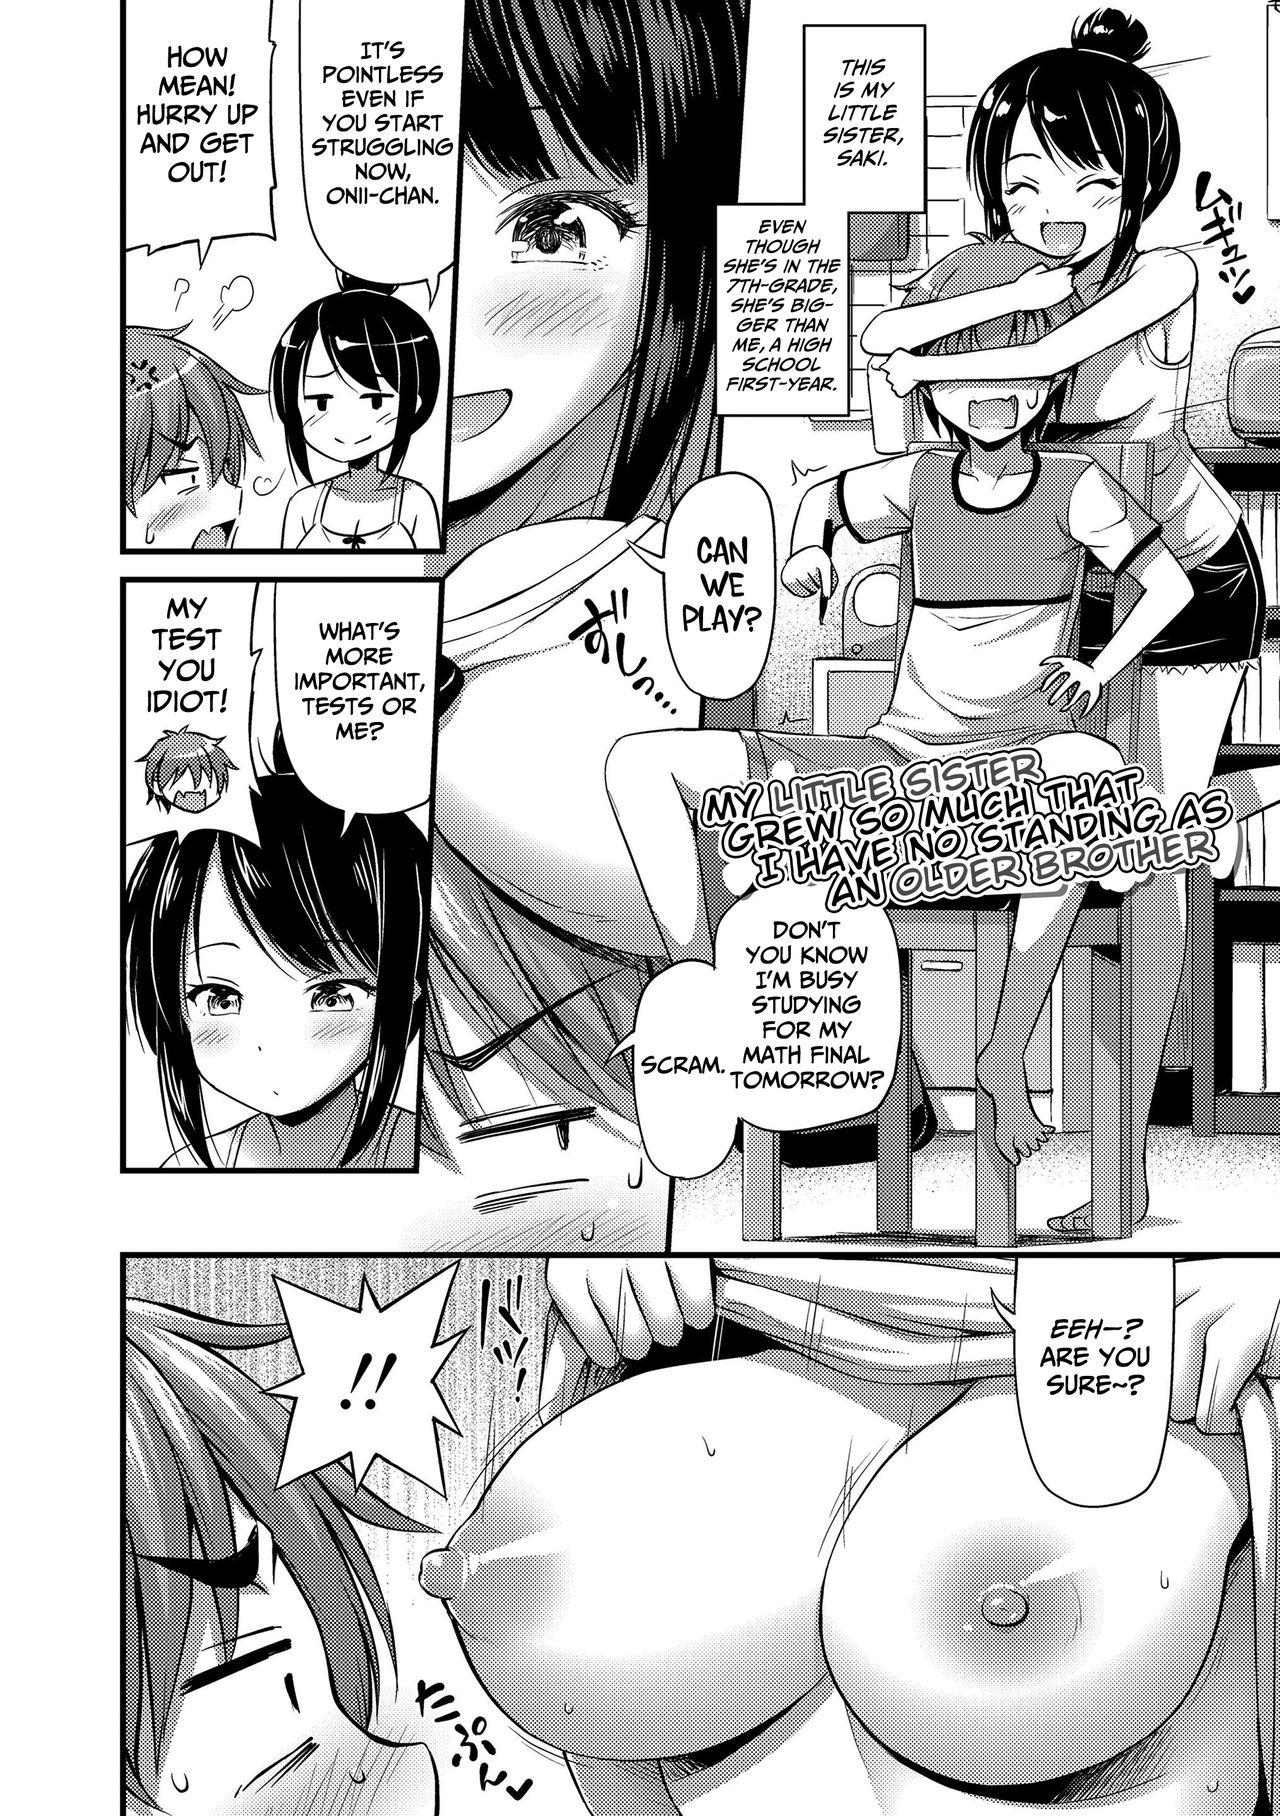 Gay Hairy Imouto ga Sodachi Sugite Ani no Tachiba ga Nai | My Little Sister Grew So Much That I Have No Standing as an Older Brother Moms - Page 2